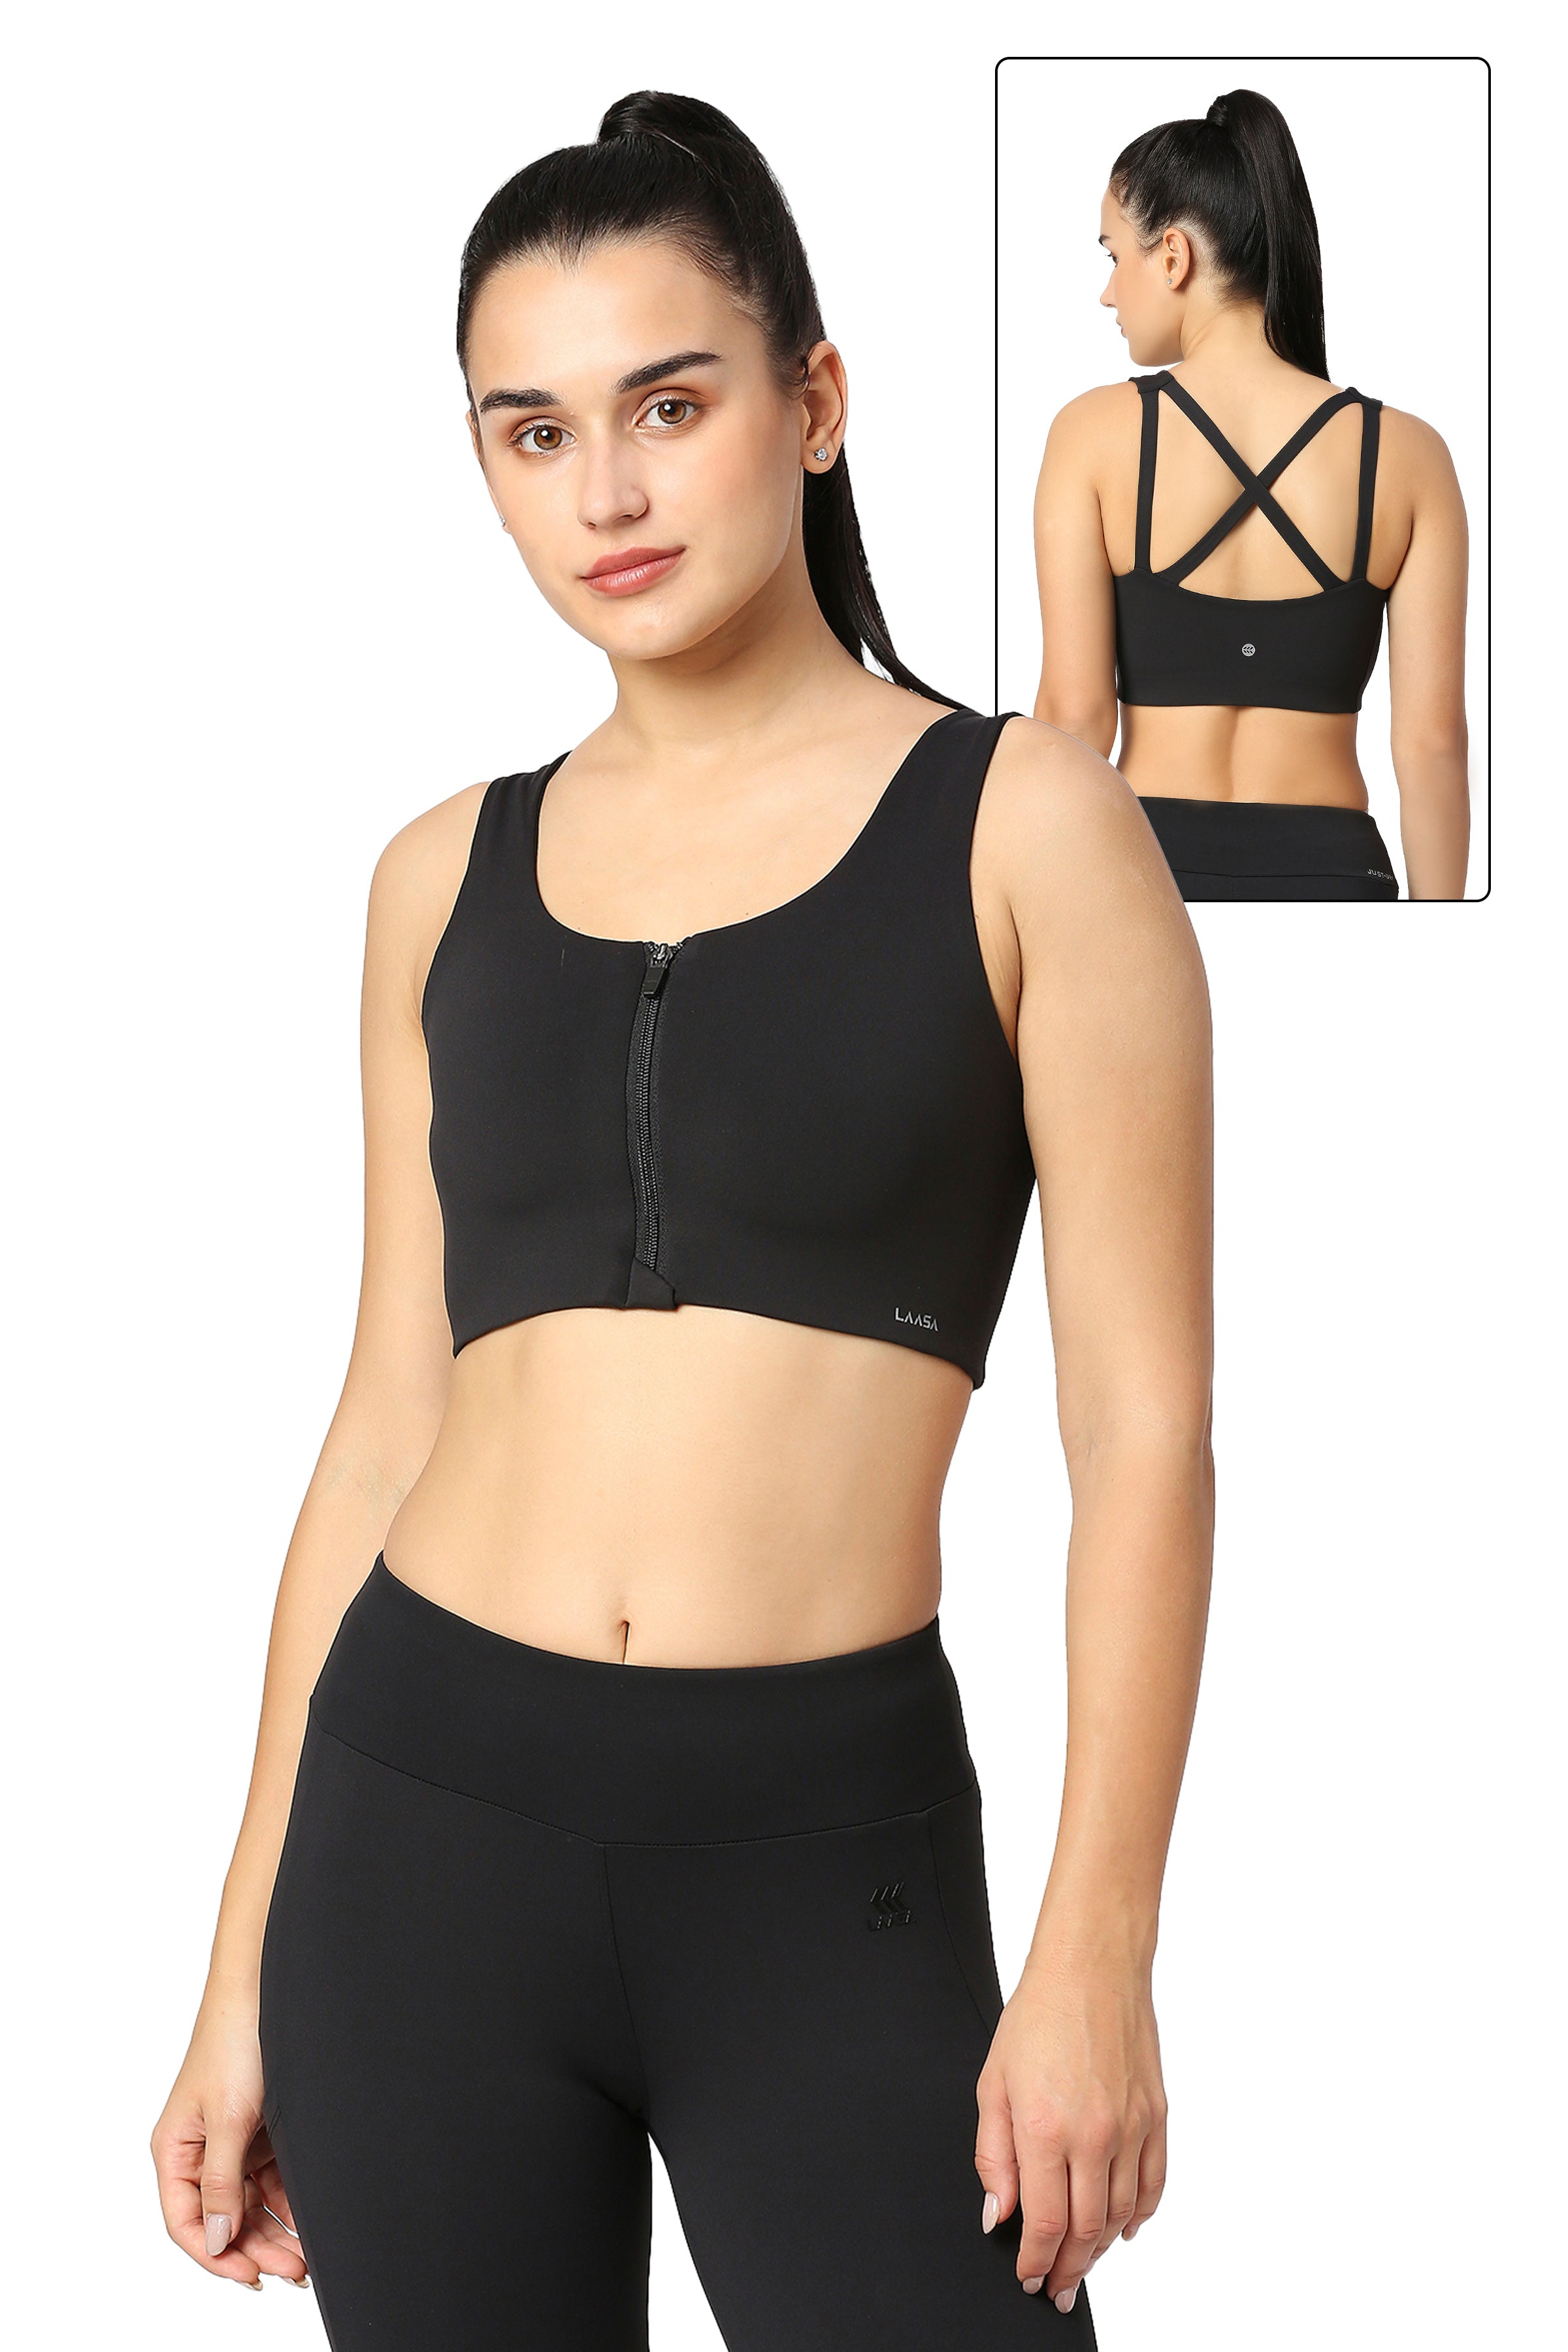 VFUS Women's Sports Bra Zip Front Open Back Square Neck Medium-high Support  Workout Tank Tops for Gym(X-Small,Black) at  Women's Clothing store